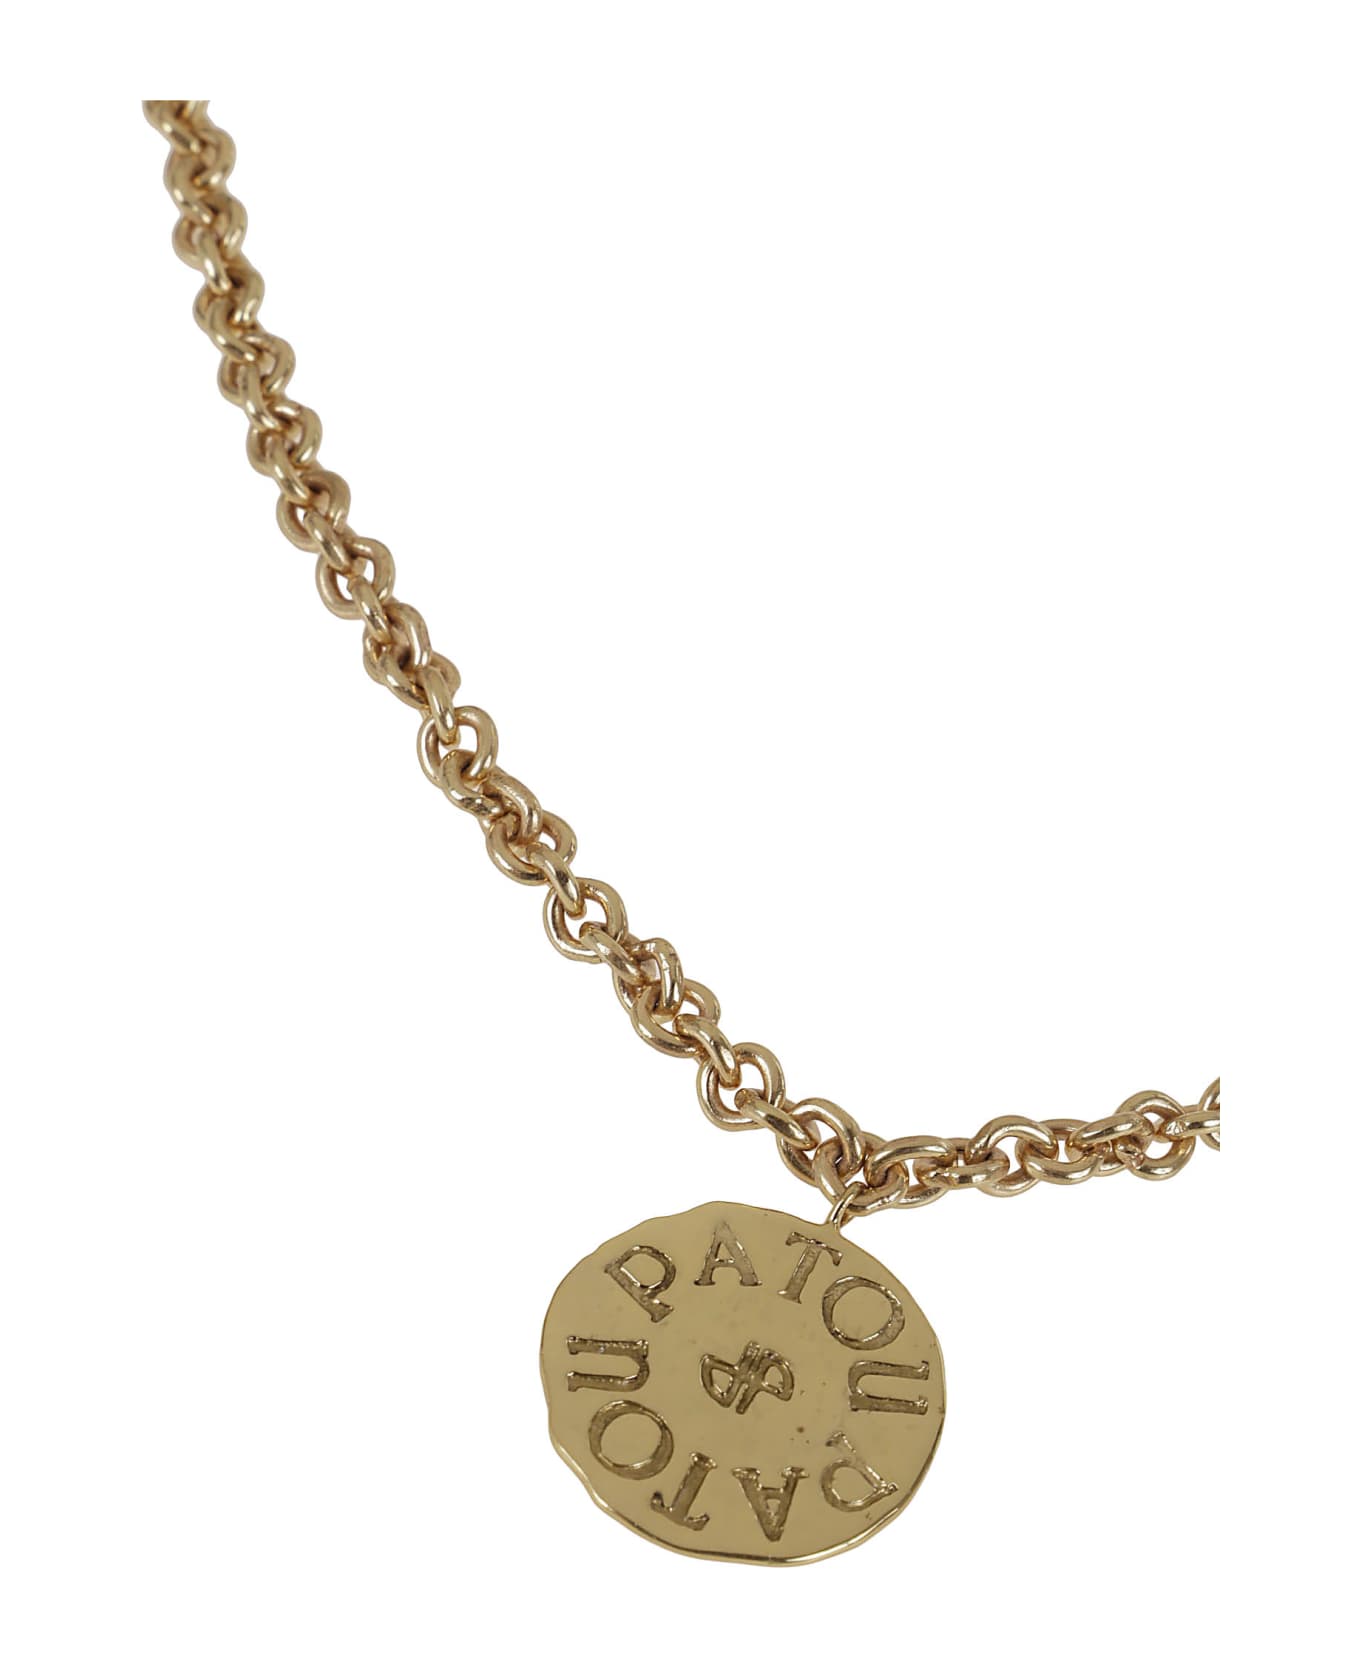 Patou Antique Coin Charm Necklace - Oro ネックレス